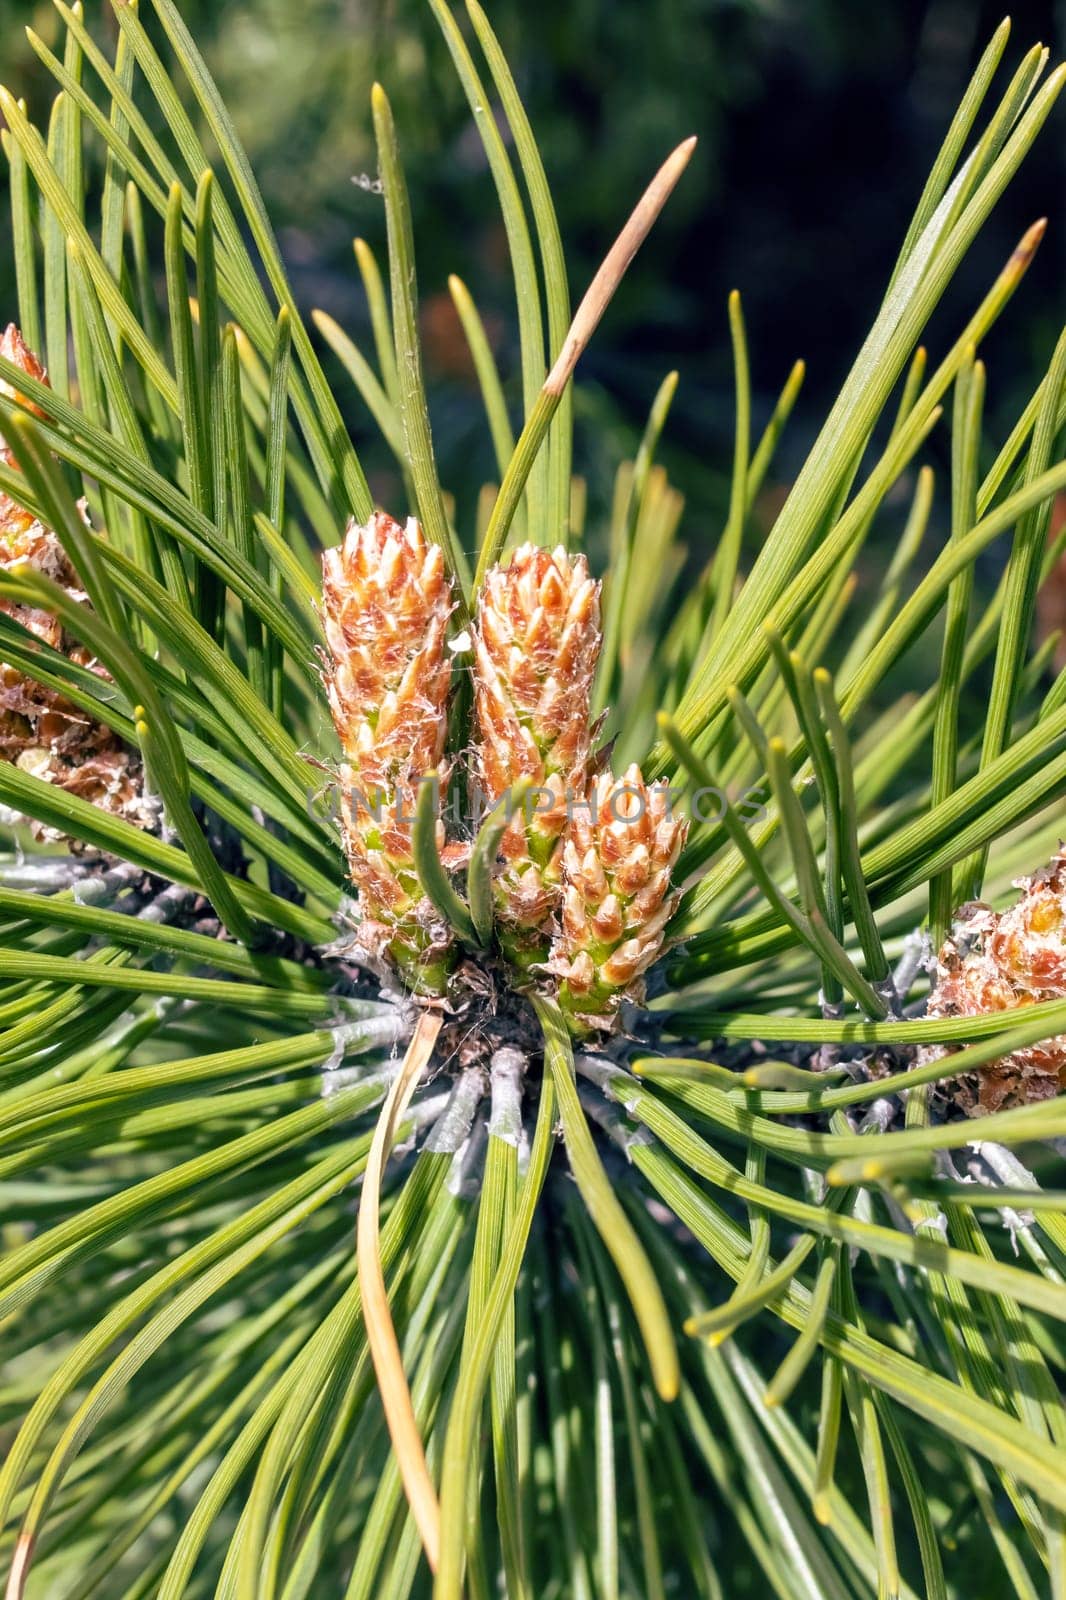 Small cones on a pine branch closeup by Vera1703